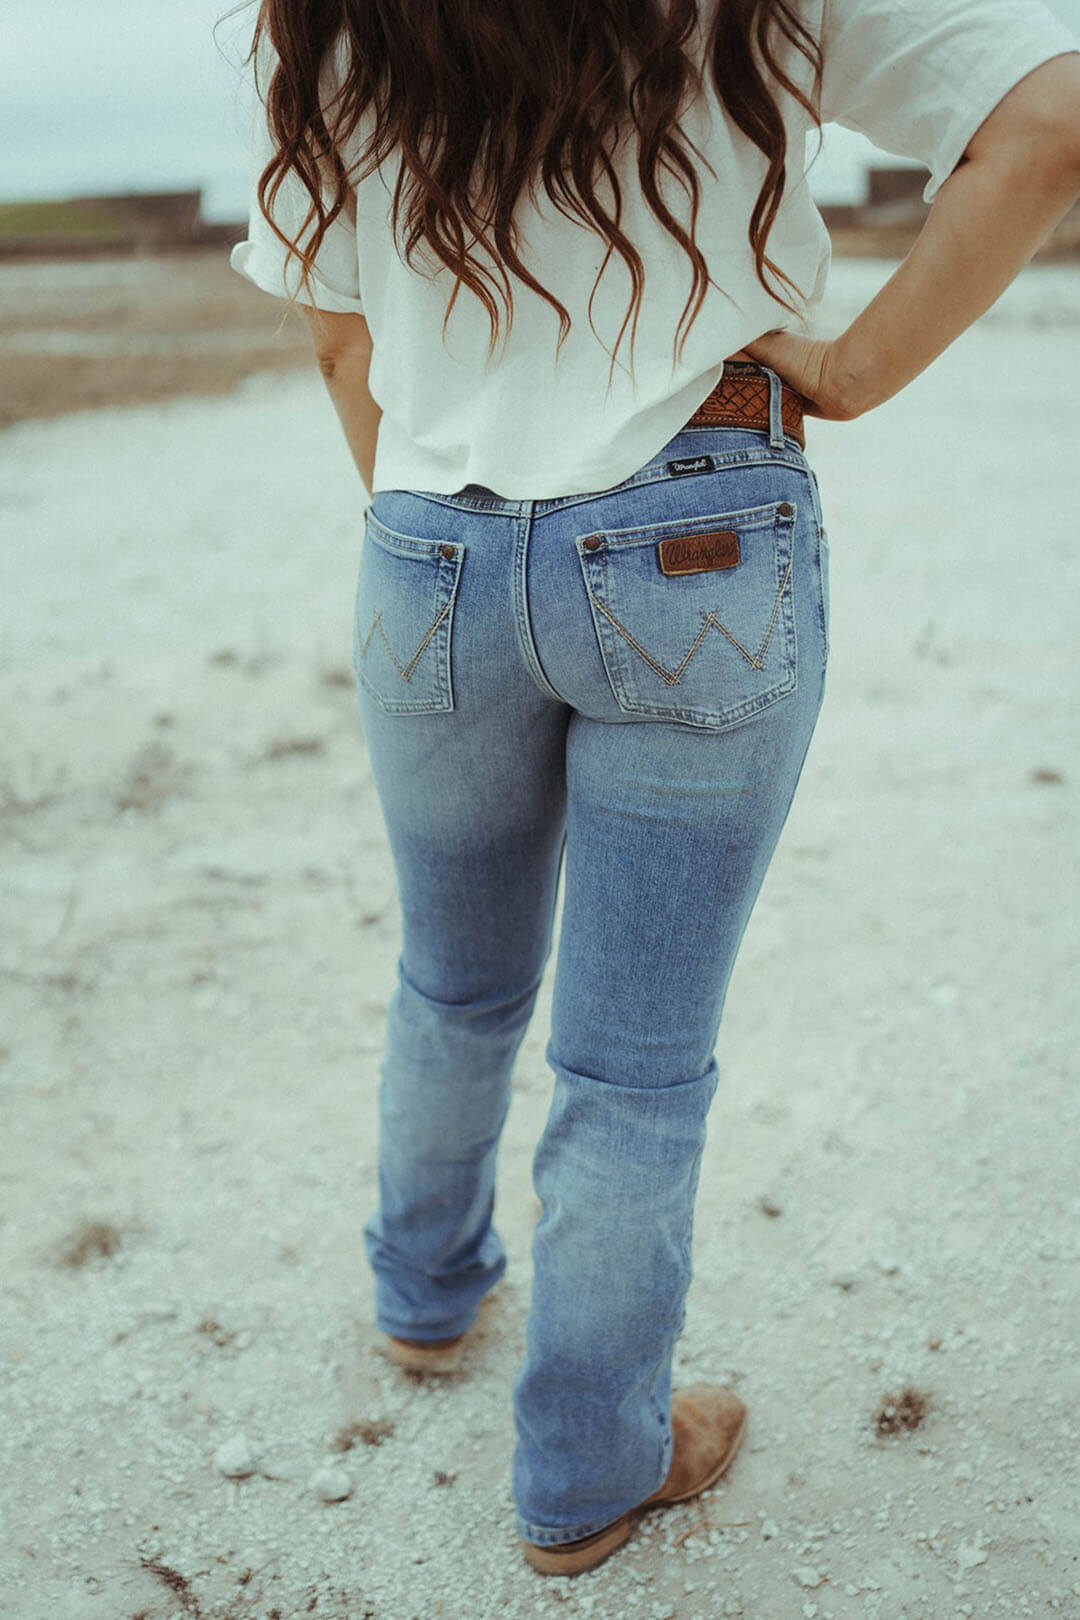 Back view of the wrangler retro mae bootcut jean in Lilibeth.  The jeans feature the wrangler emblem "W" on the pockets.